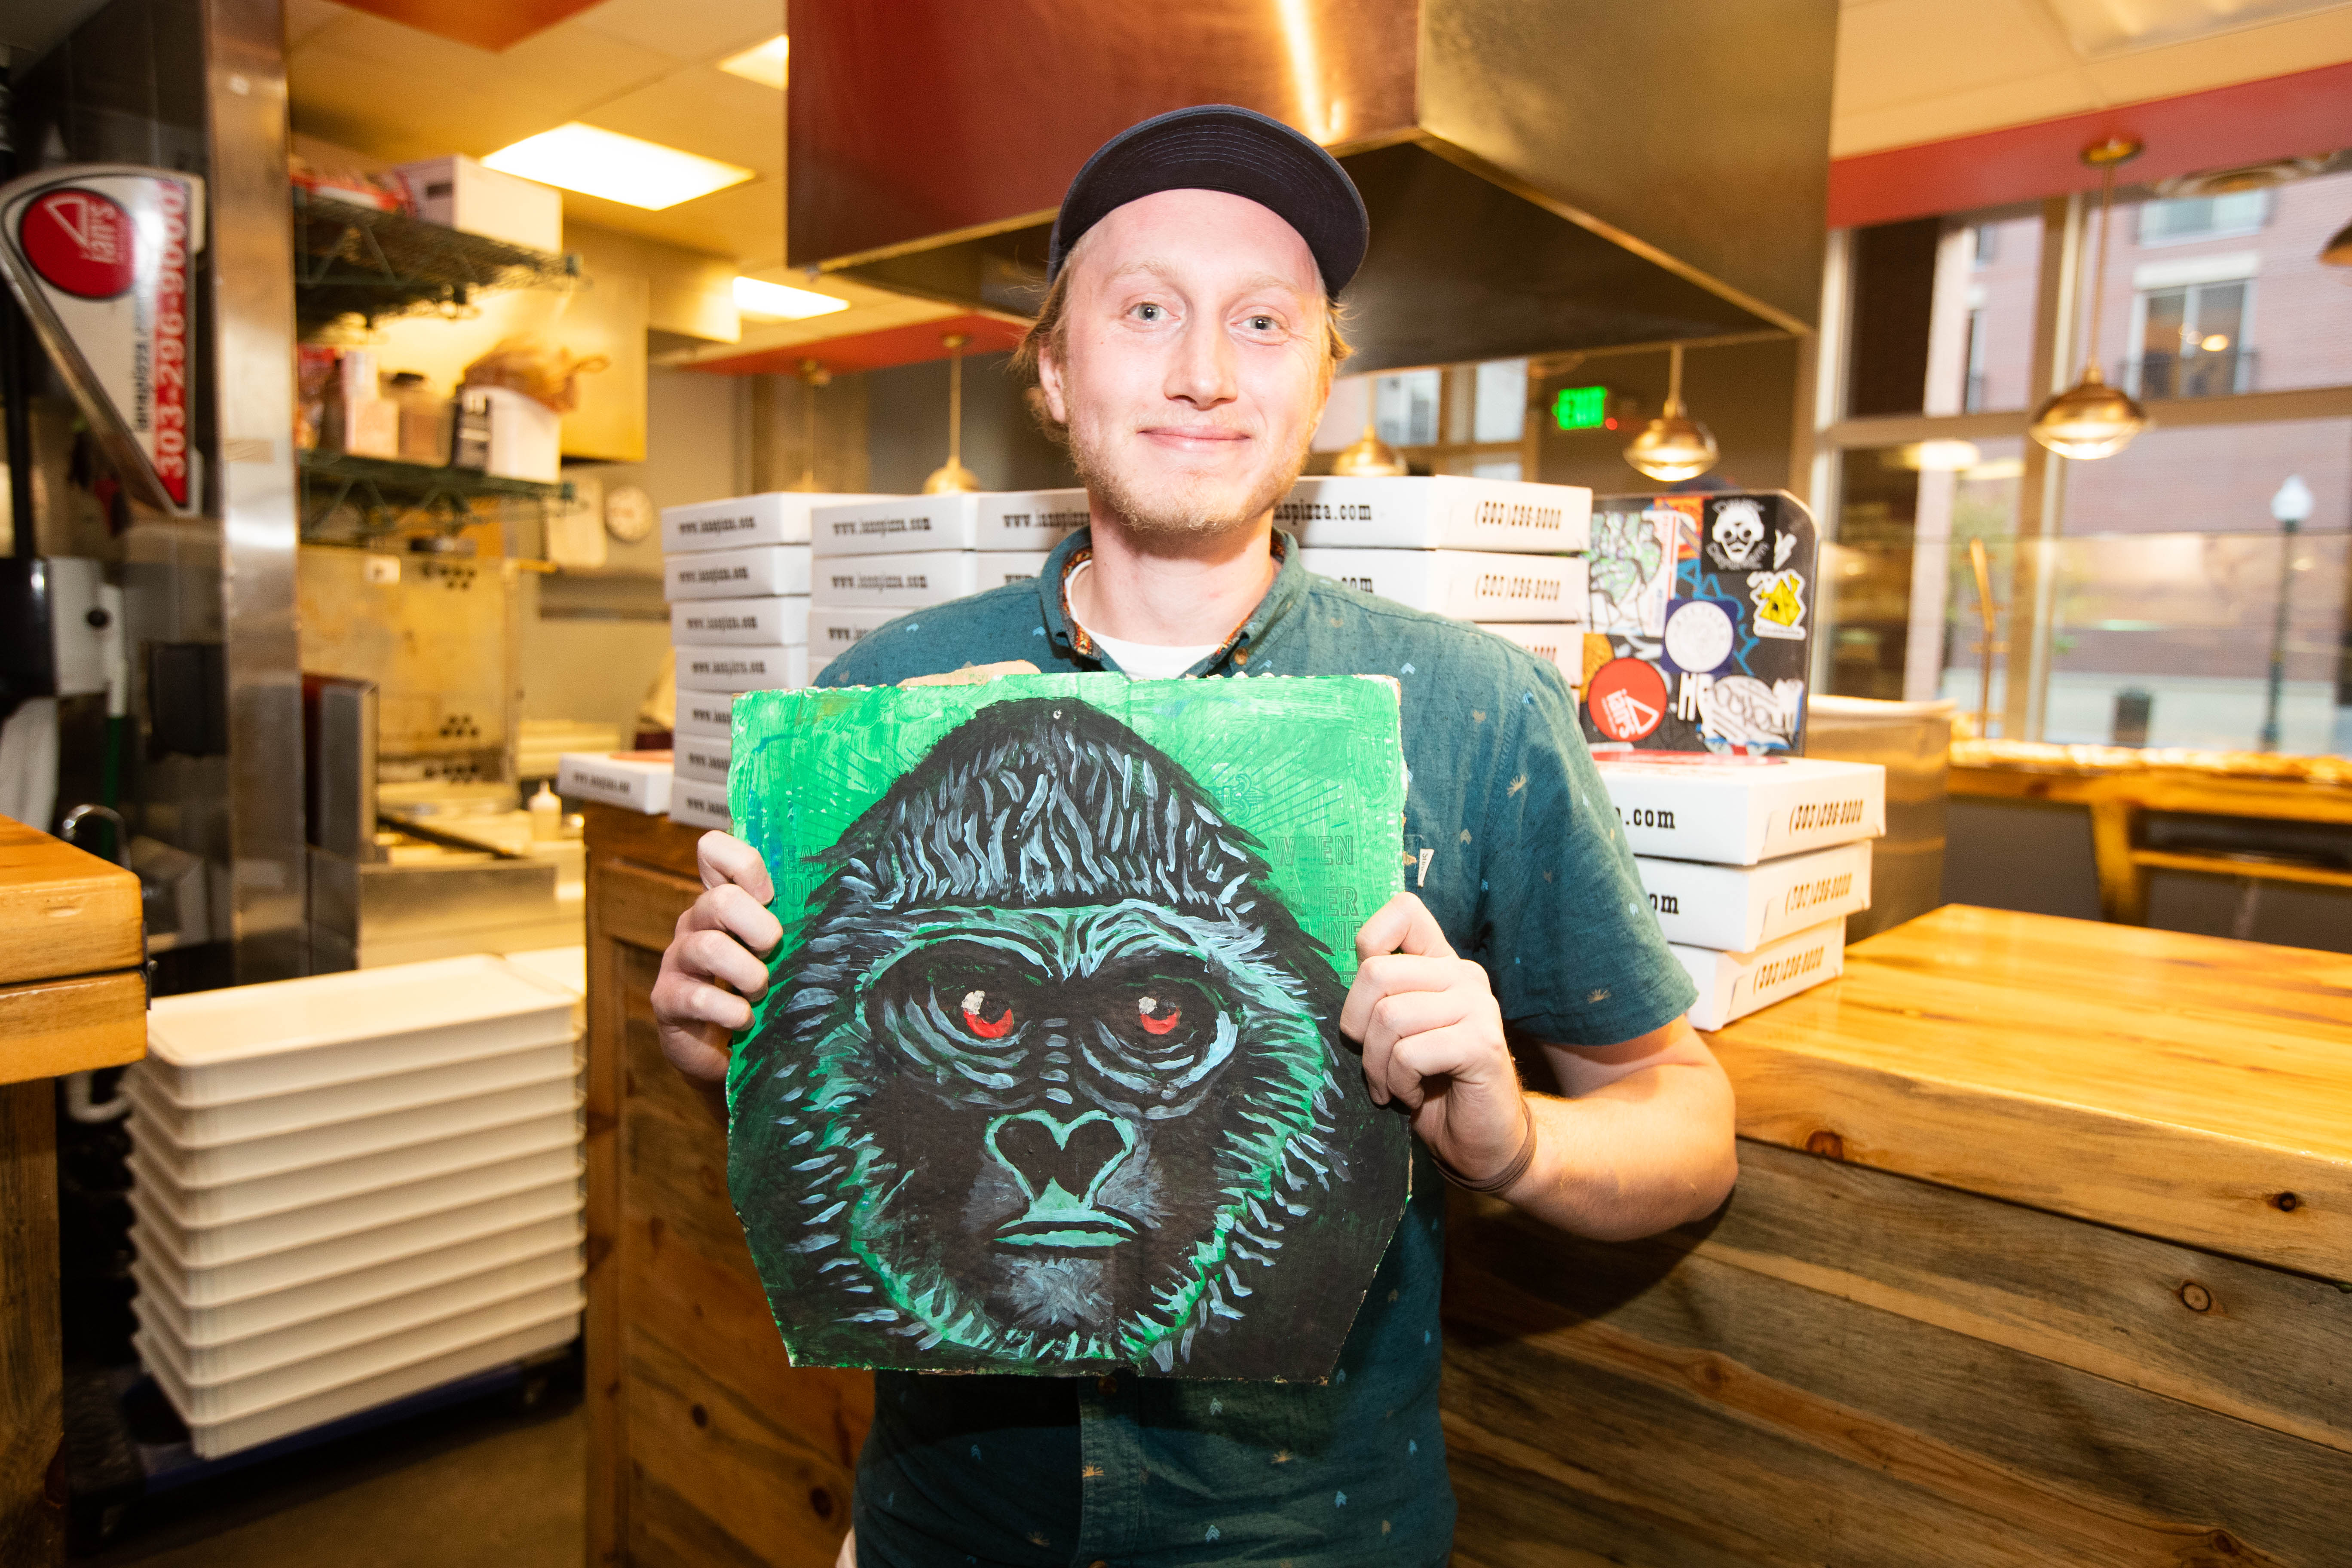 Local Part-Time Artist Uses Pizza Boxes as Canvases - 303 Magazine